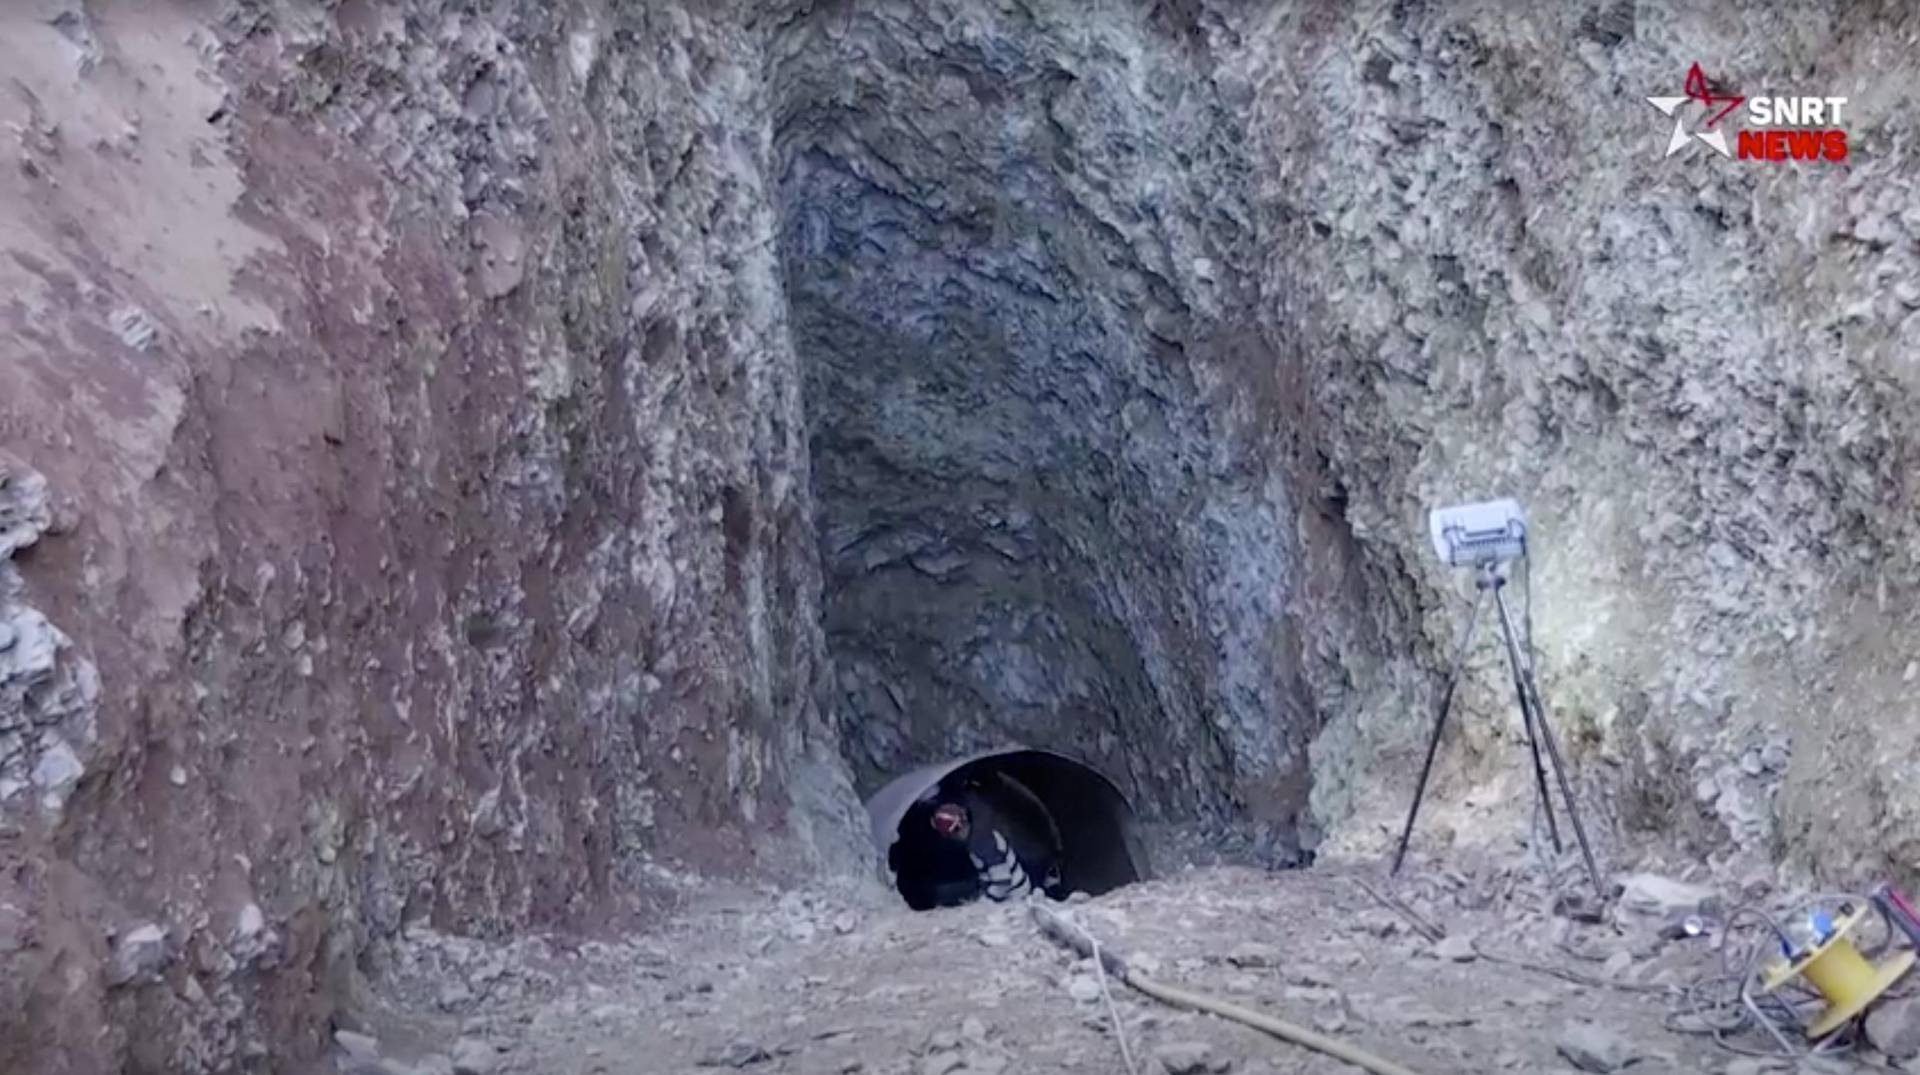 Rescuers dig to reach boy stuck in well in Chefchaouen